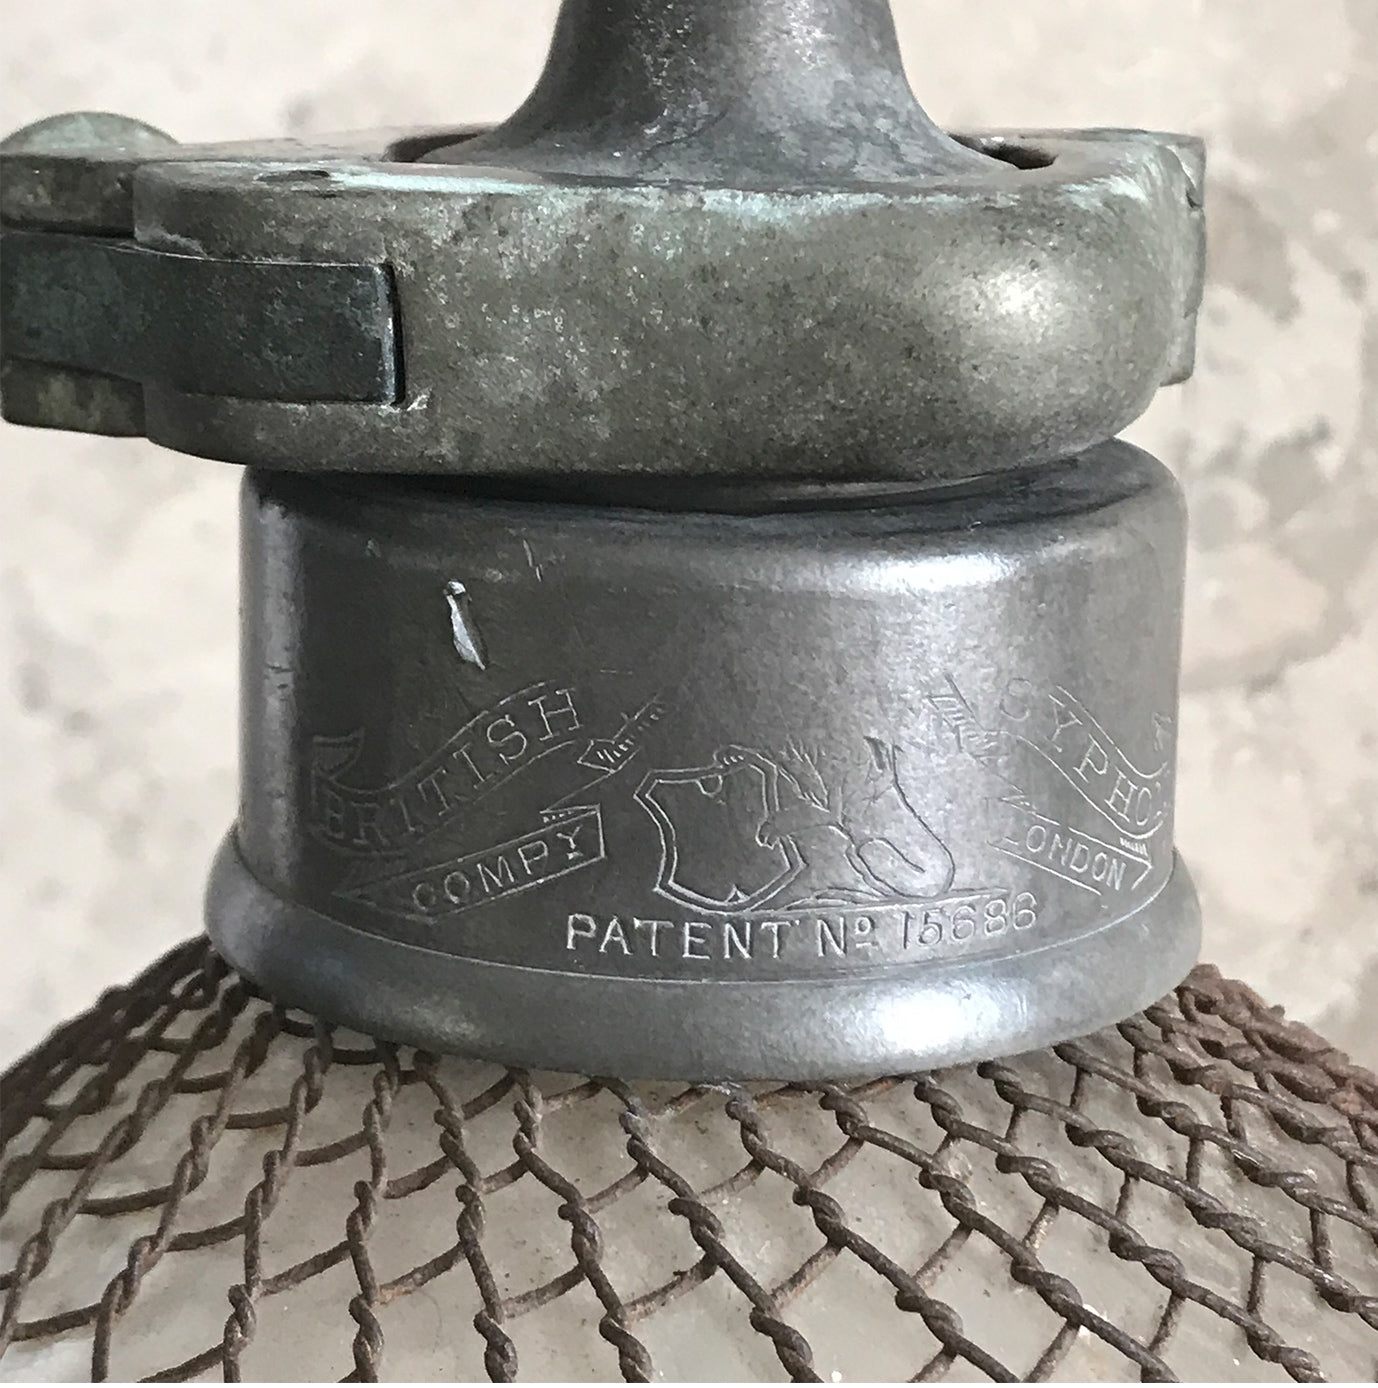 An early English soda syphon of double gourd form with a metal wire mesh net to the body, stamped 'British Syphon Company London'. Circa 1890 - SHOP NOW - www.intovintage.co.uk